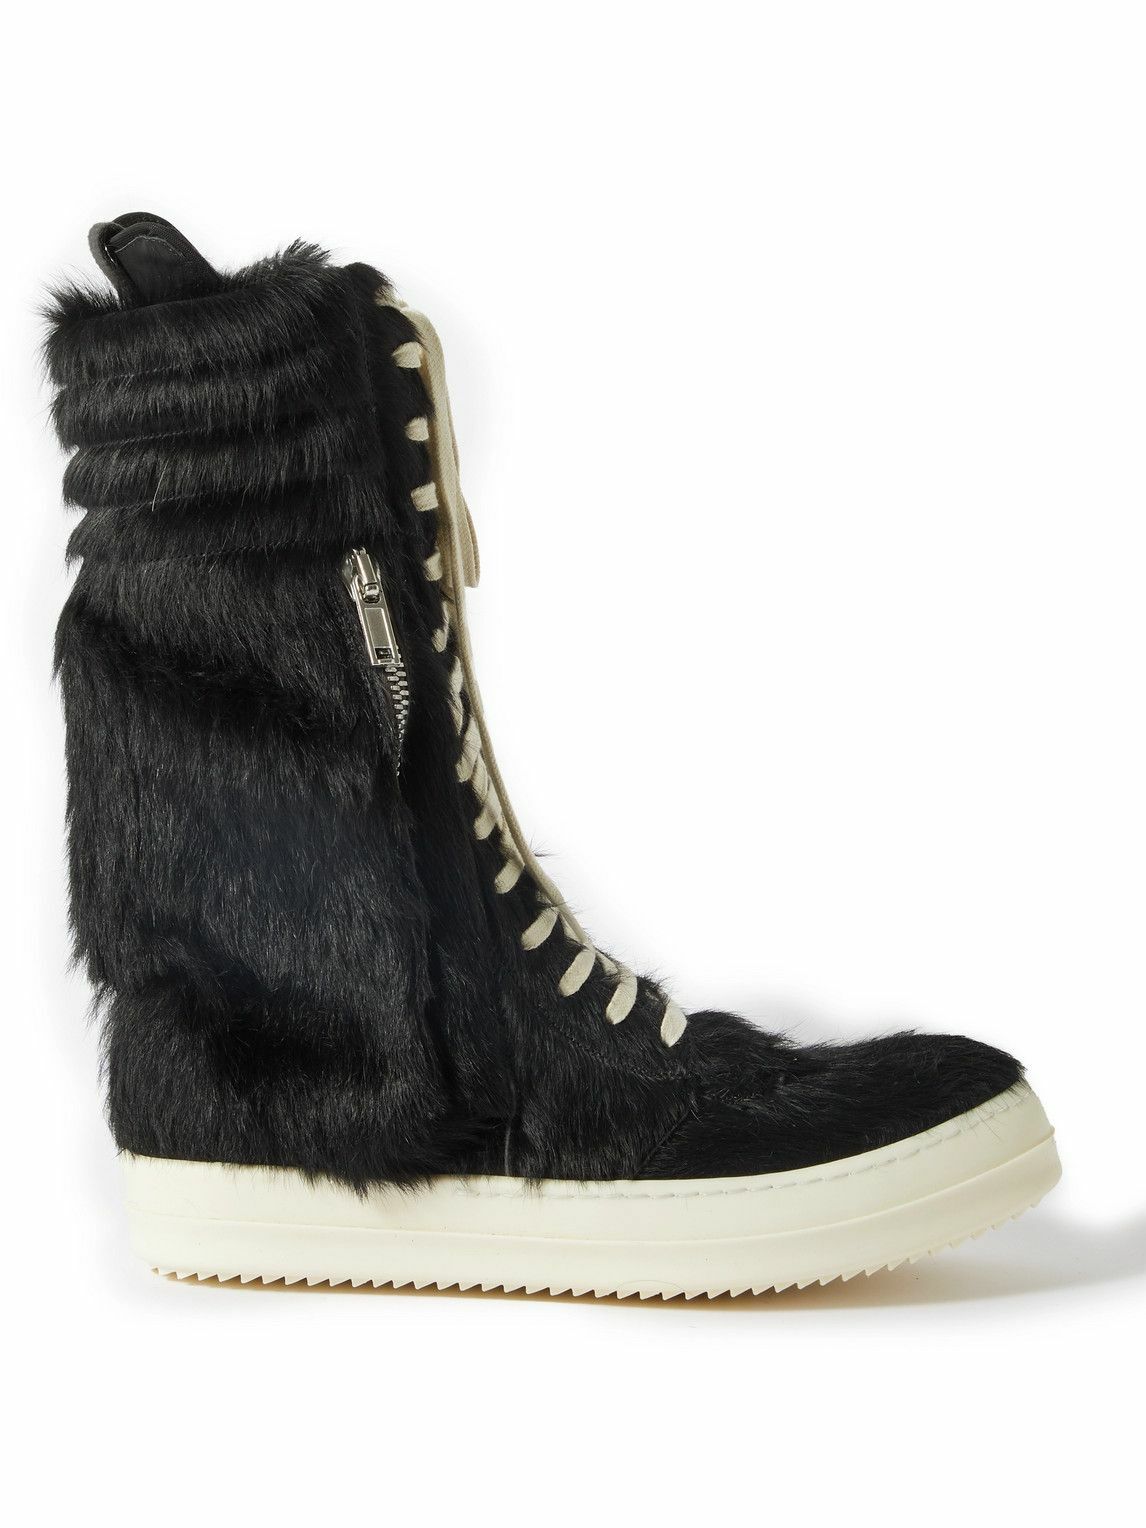 Rick Owens - Cargo Basket Faux Fur and Leather High-Top Sneakers - Black